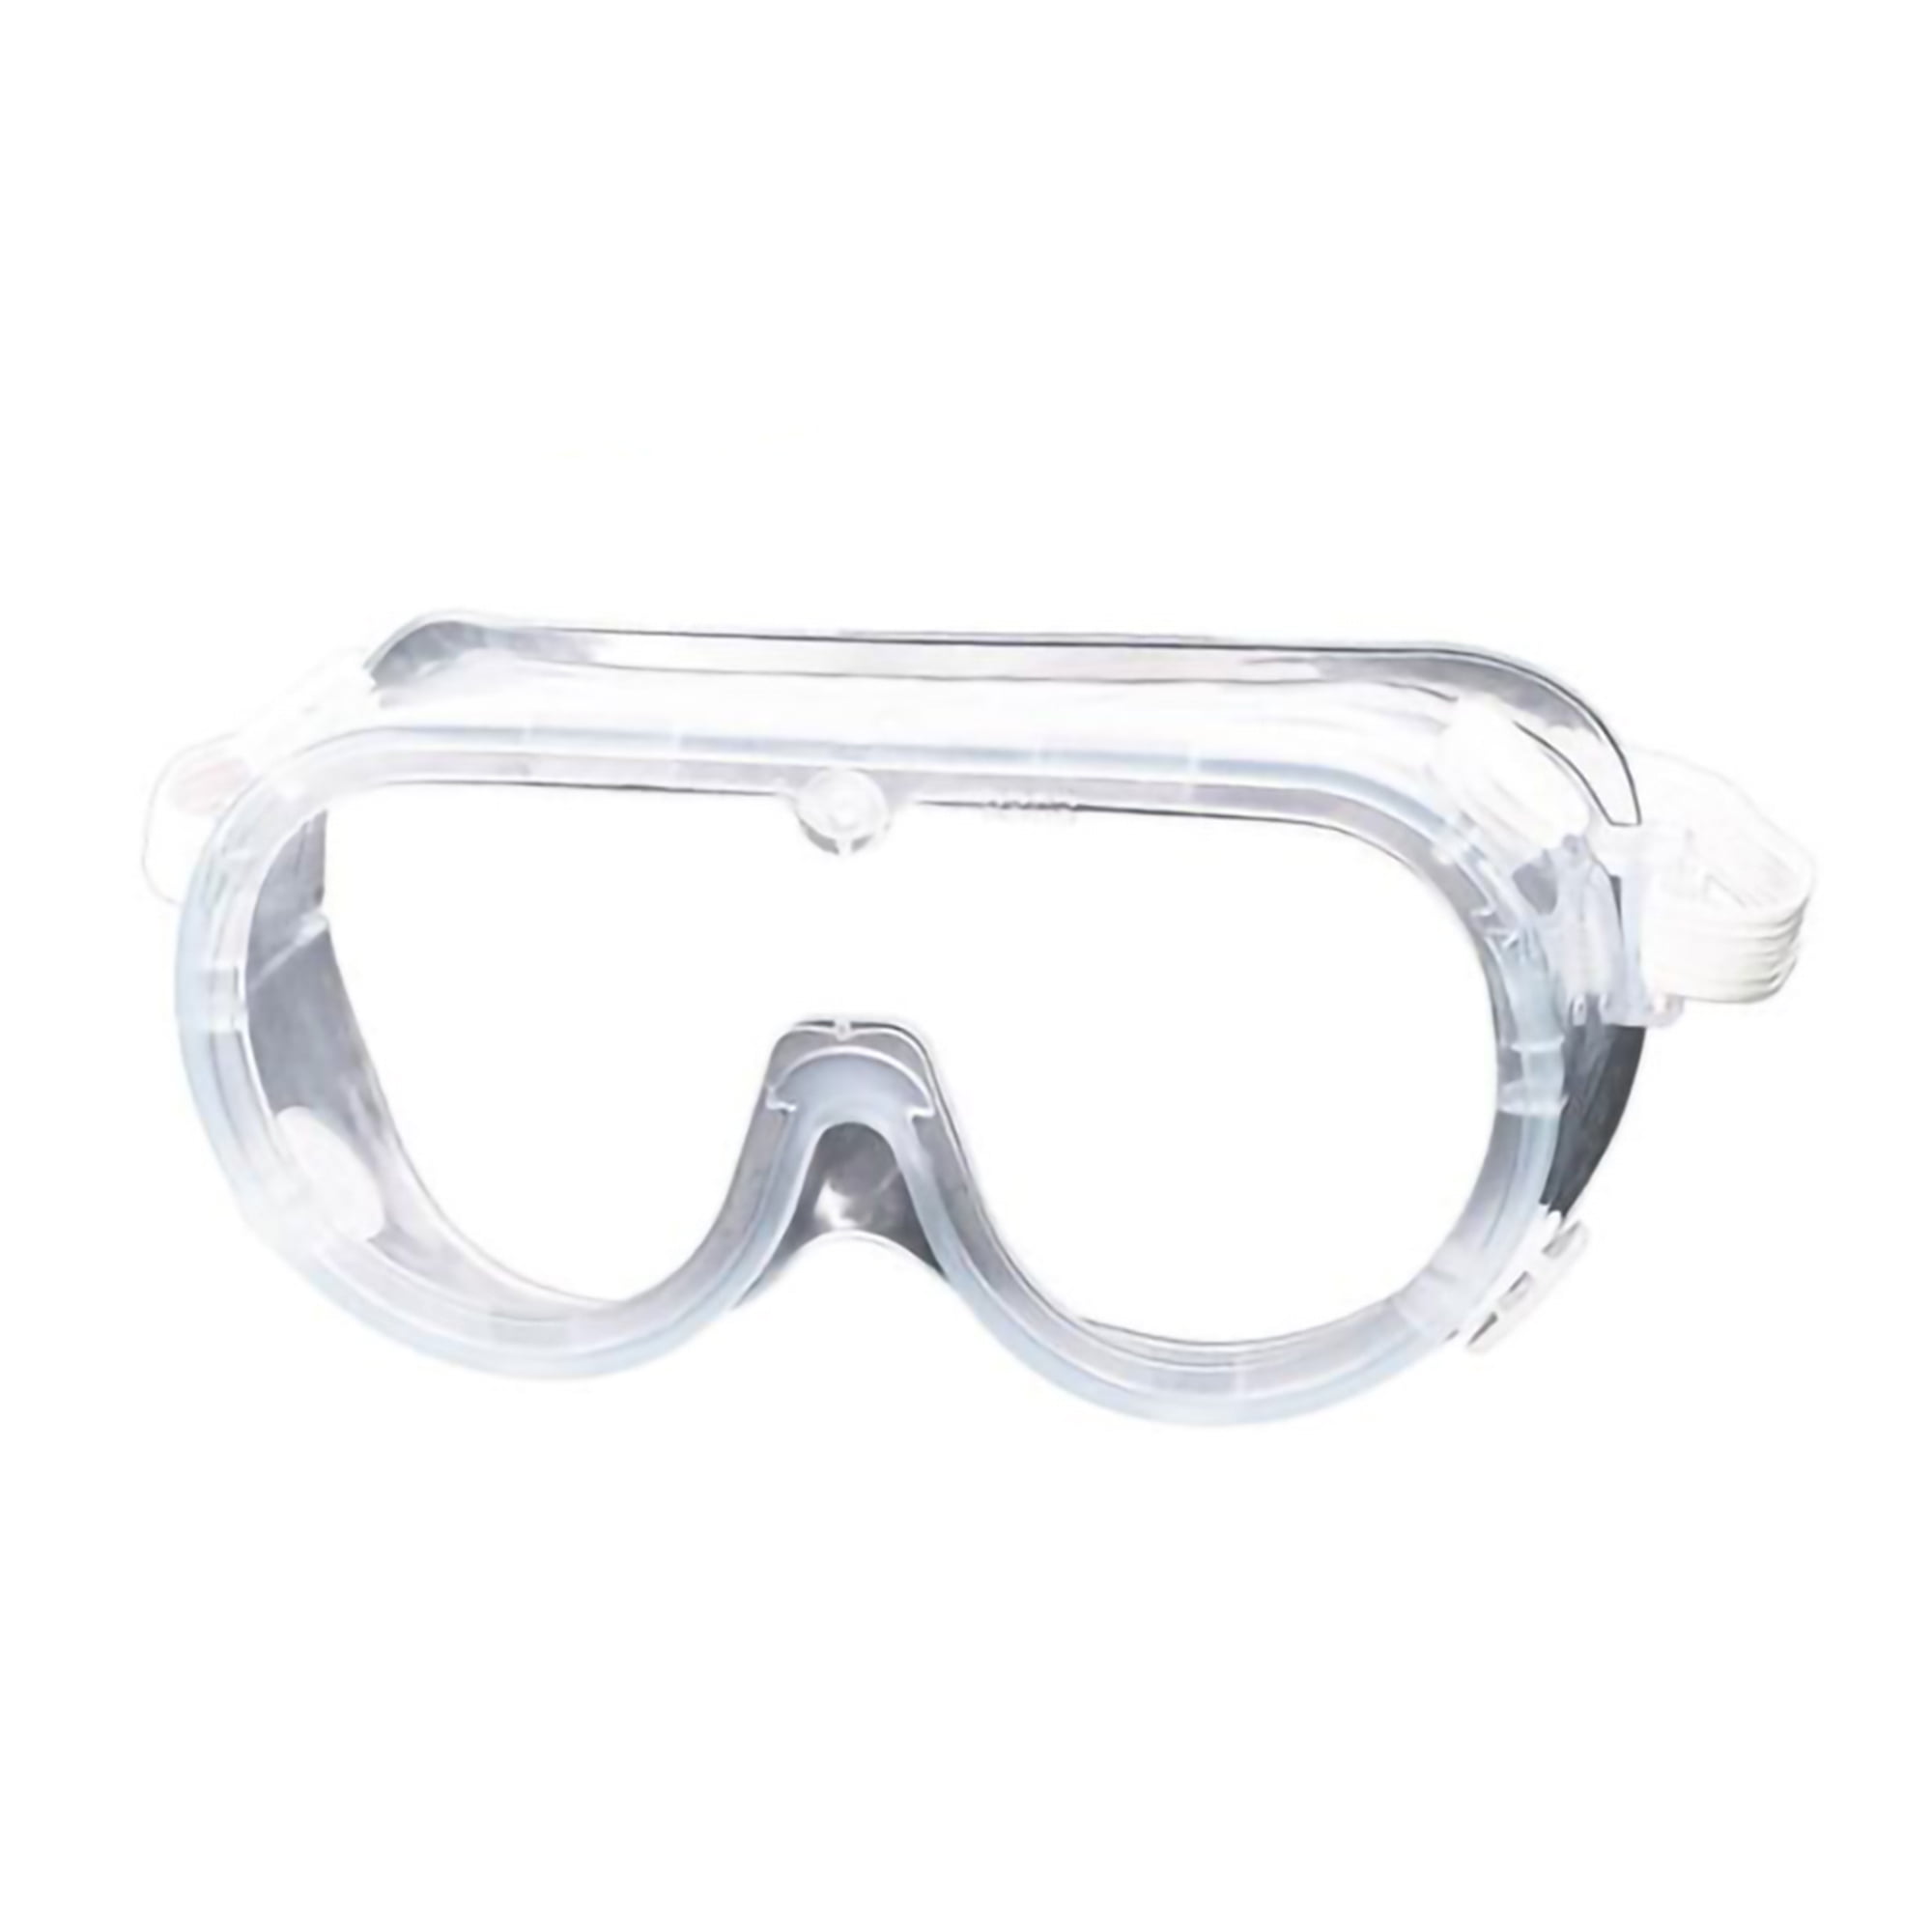 Details about   Dust Eye GOGGLES Drool-proof Surgical Lab Dental Protective Safety Clear Glasses